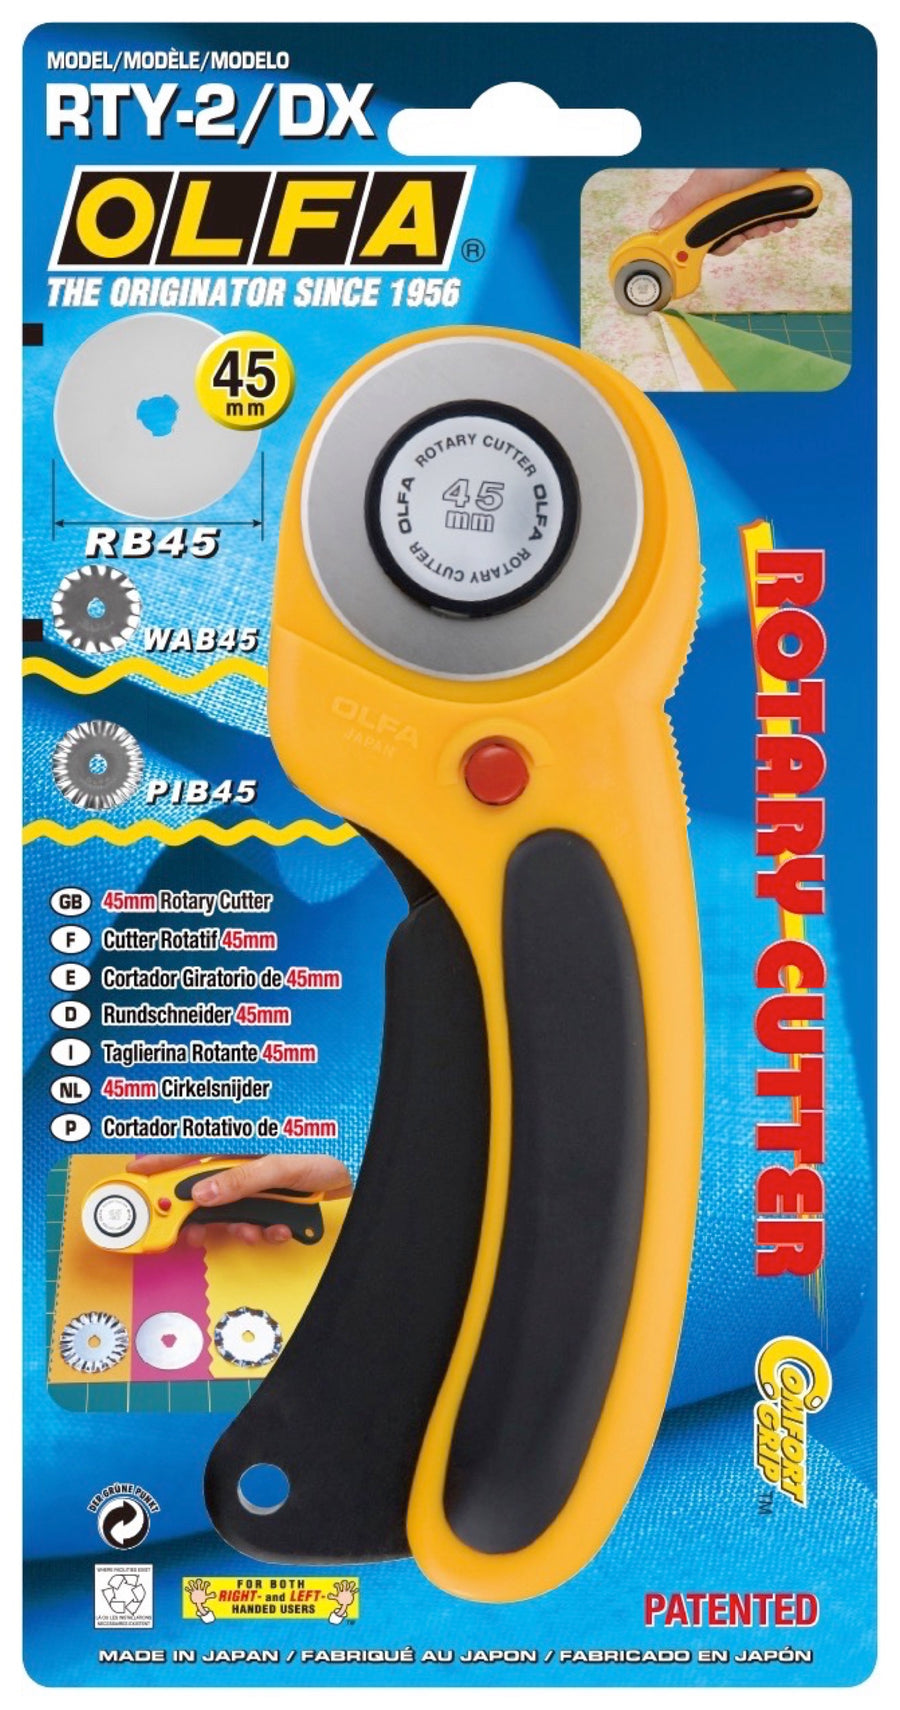 OLFA RTY-/DX deluxe ergonomic rotary cutter in 45mm